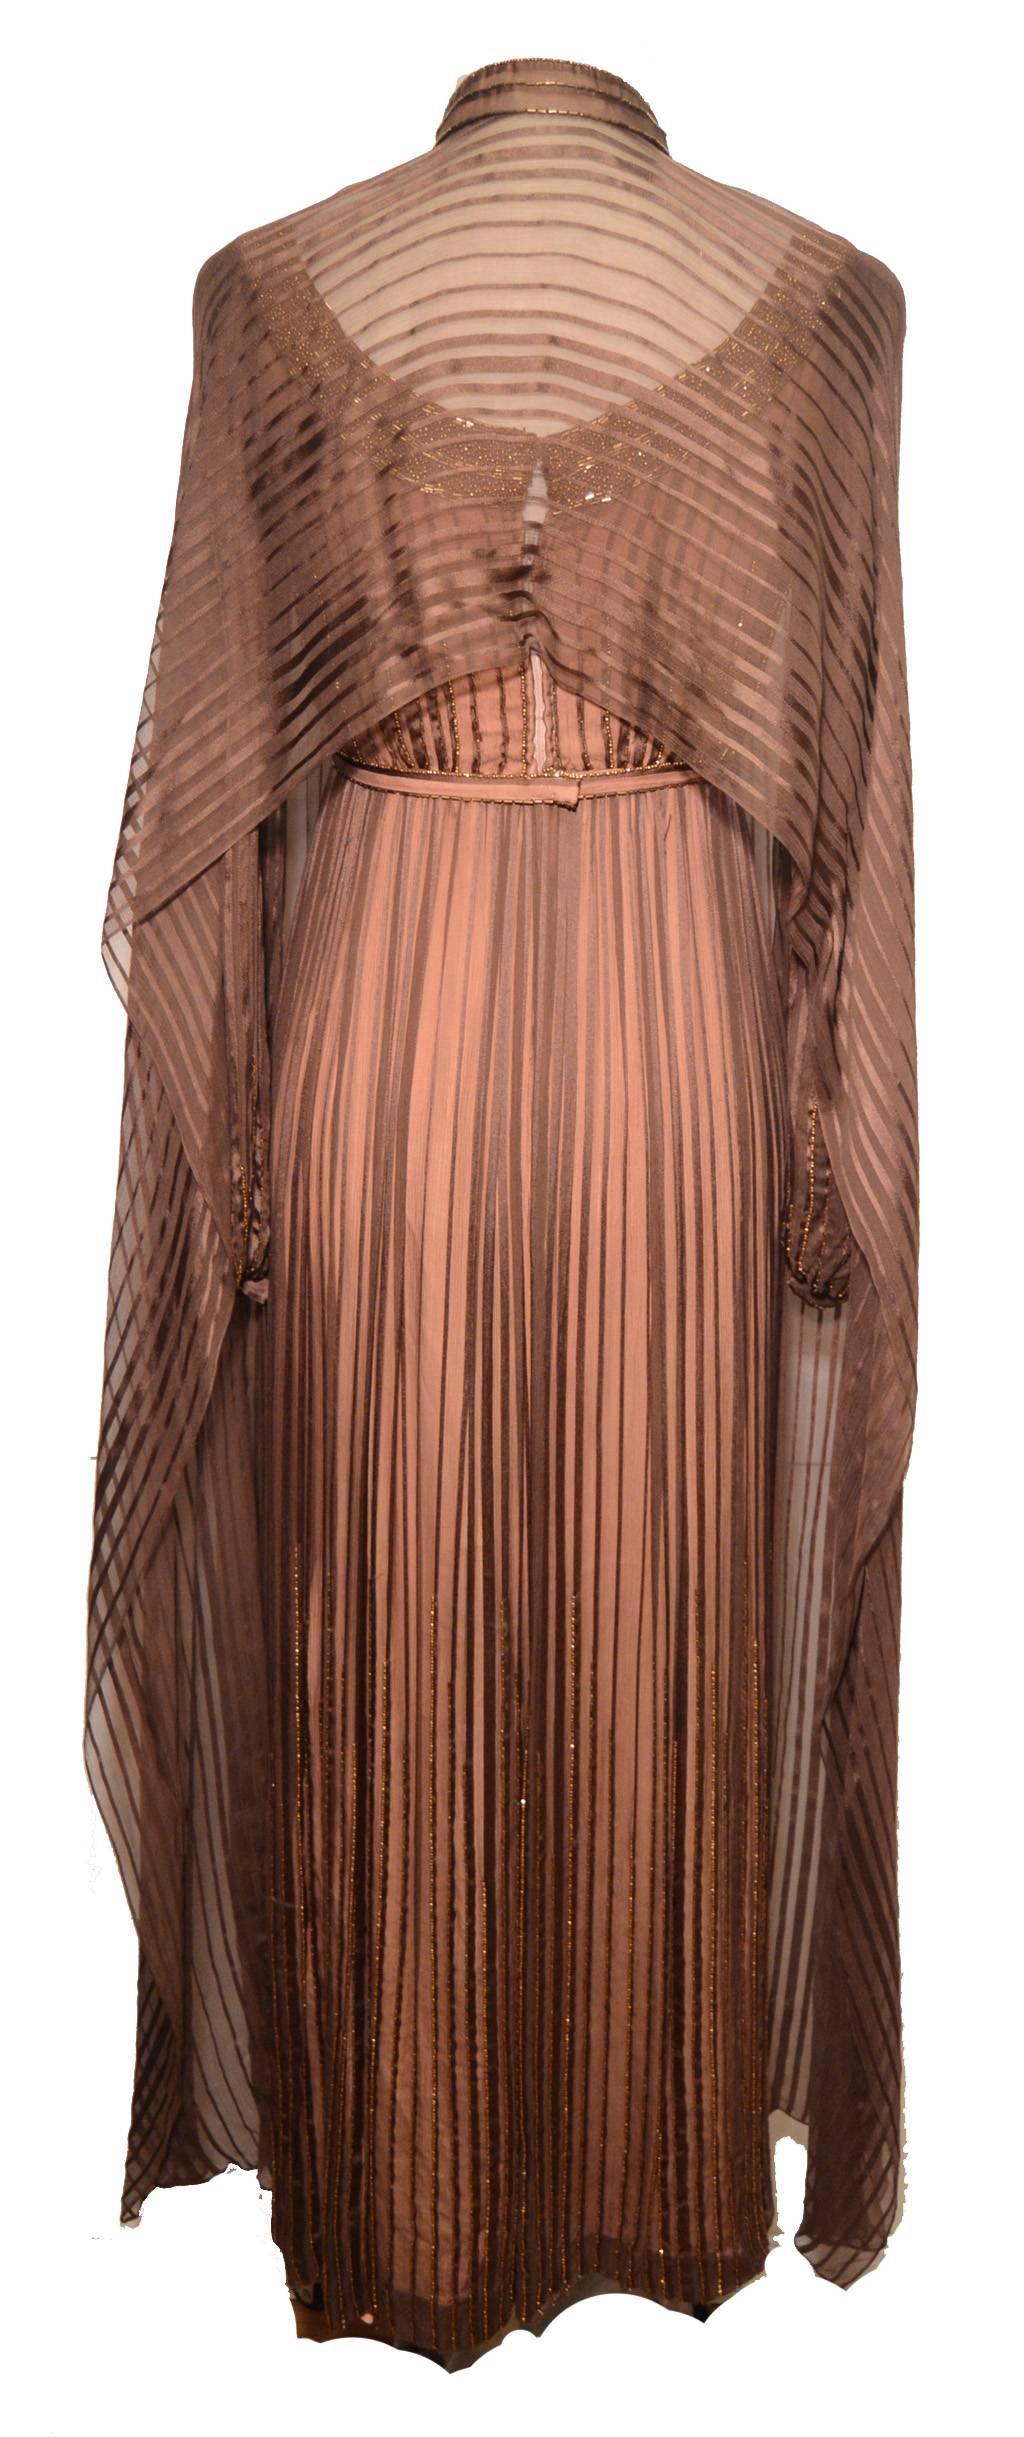 Stunning Alfred Bosand beaded silk chiffon gown and shawl c1960s.  Brown silk chiffon over a peach silk lining trimmed with delicate hand beading along the collar, bust, hem, and sleeves. Beaded scoop neck in brown and bronze beads.  Empire style